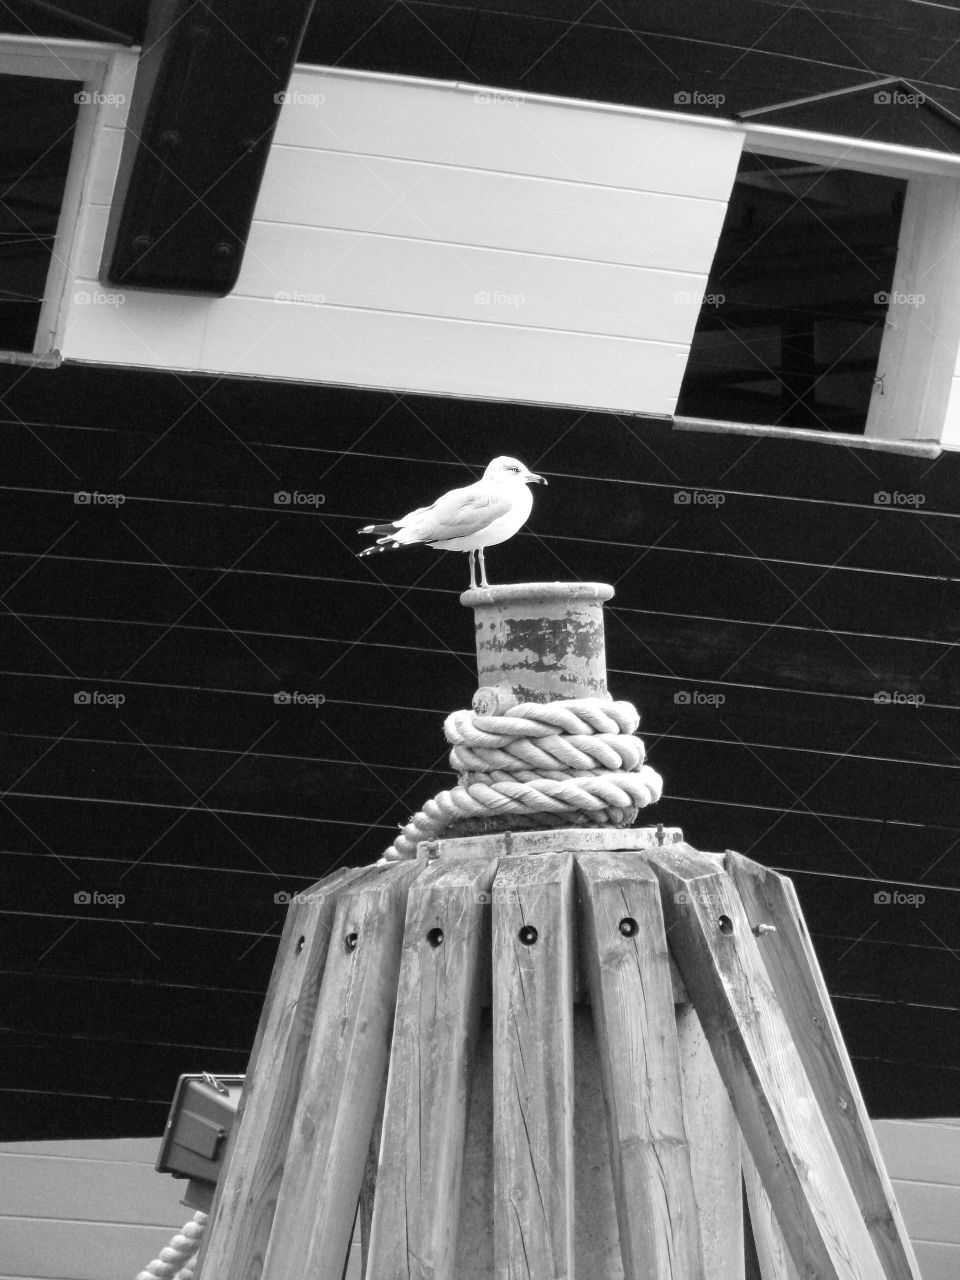 Seagull perched on dock